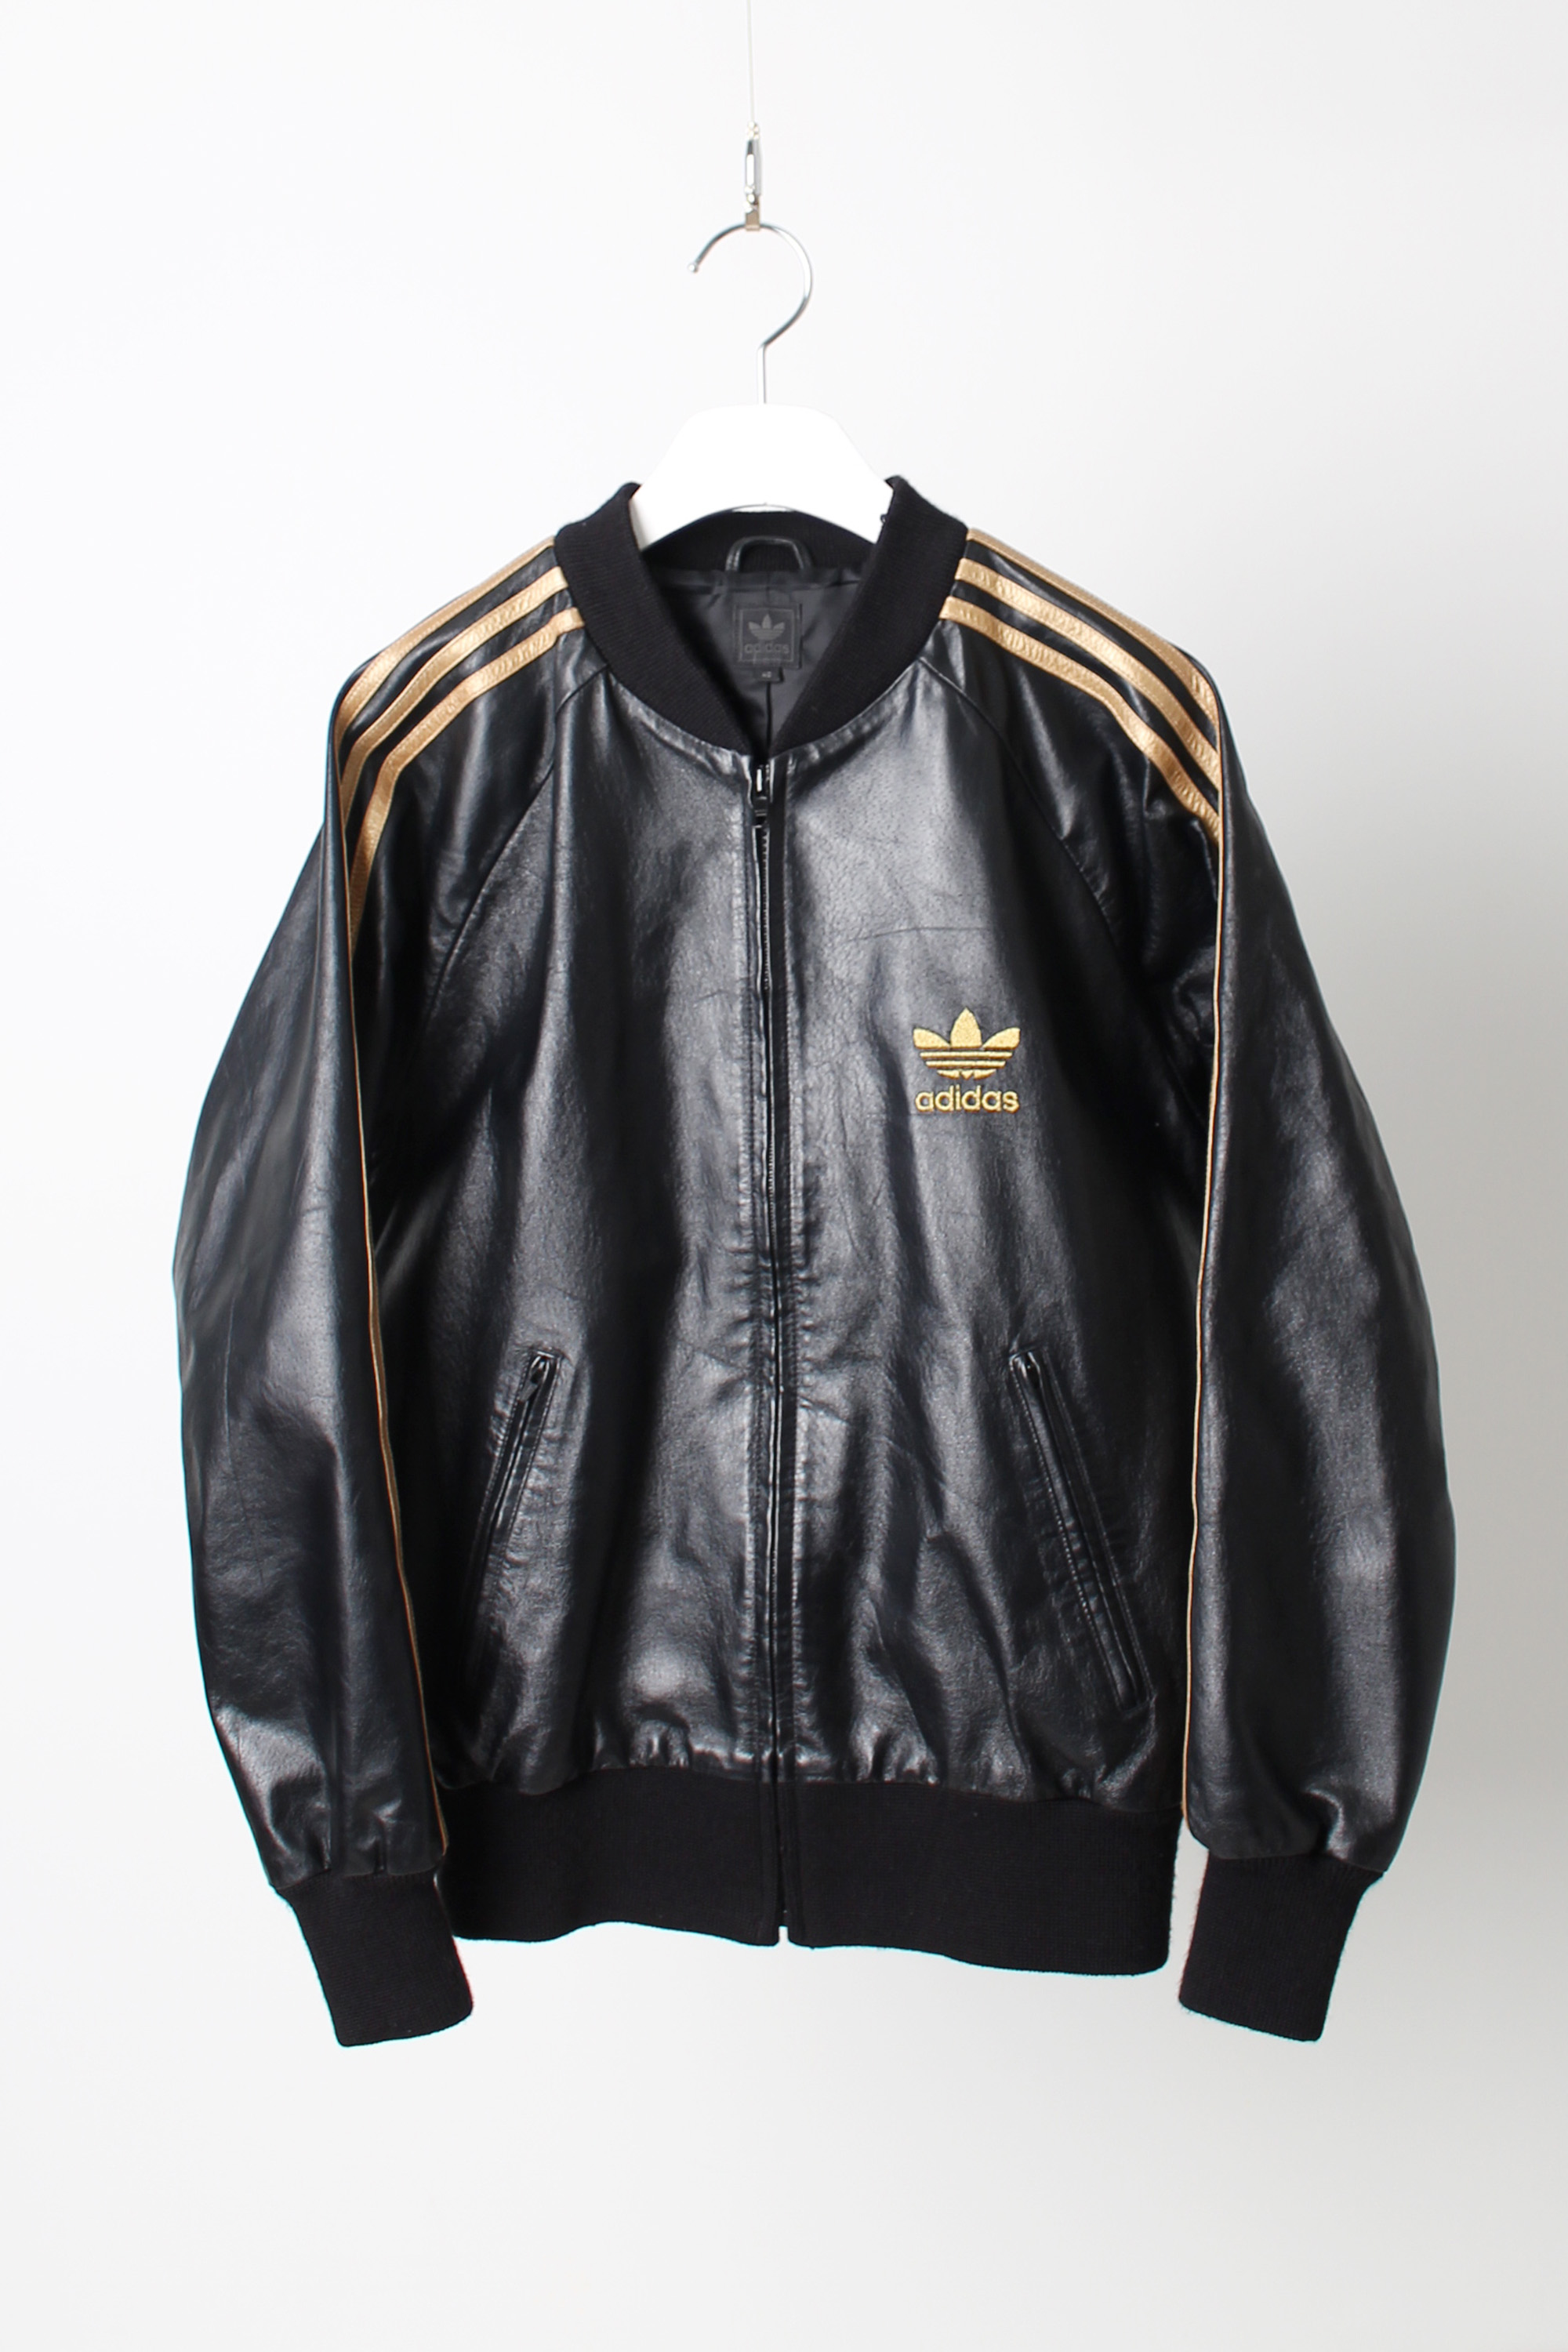 2000s adidas A-15 Leather Track Jacket